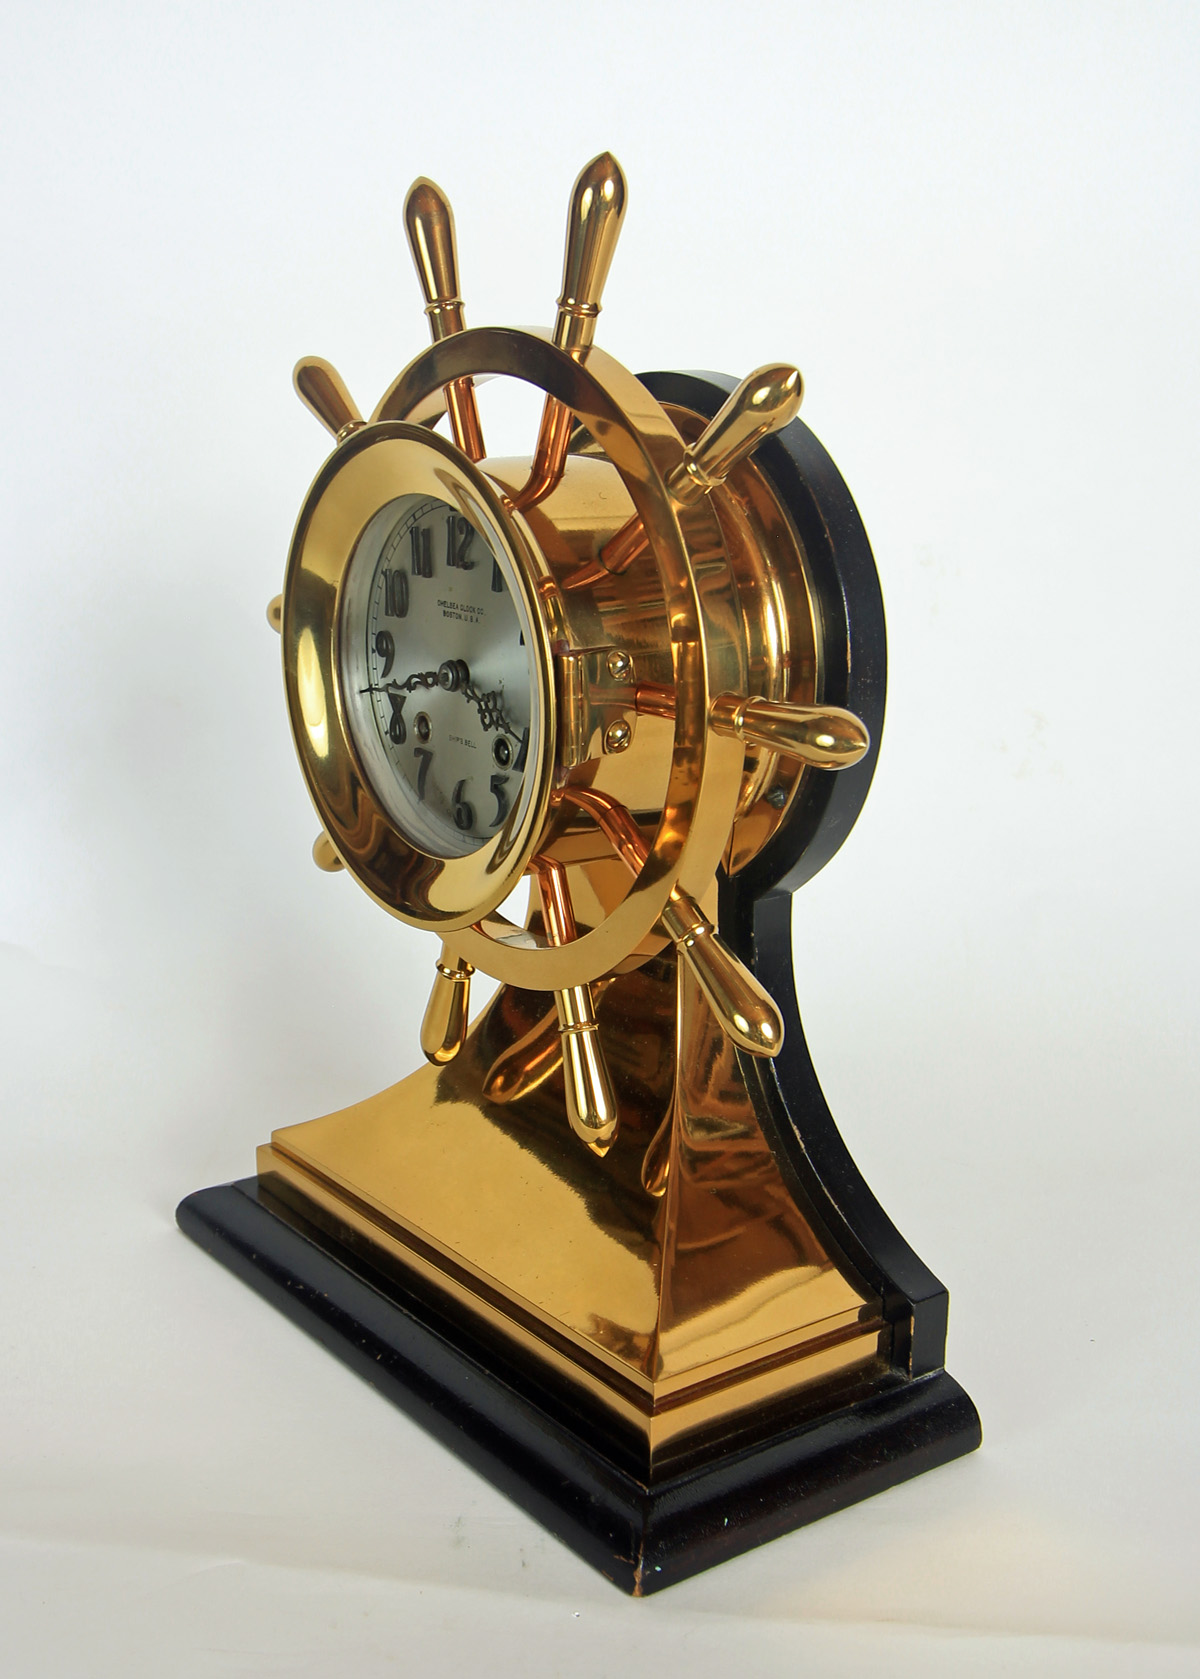 Chelsea 4 1/2 inch Special Dial Mariner Ships Bell Clock